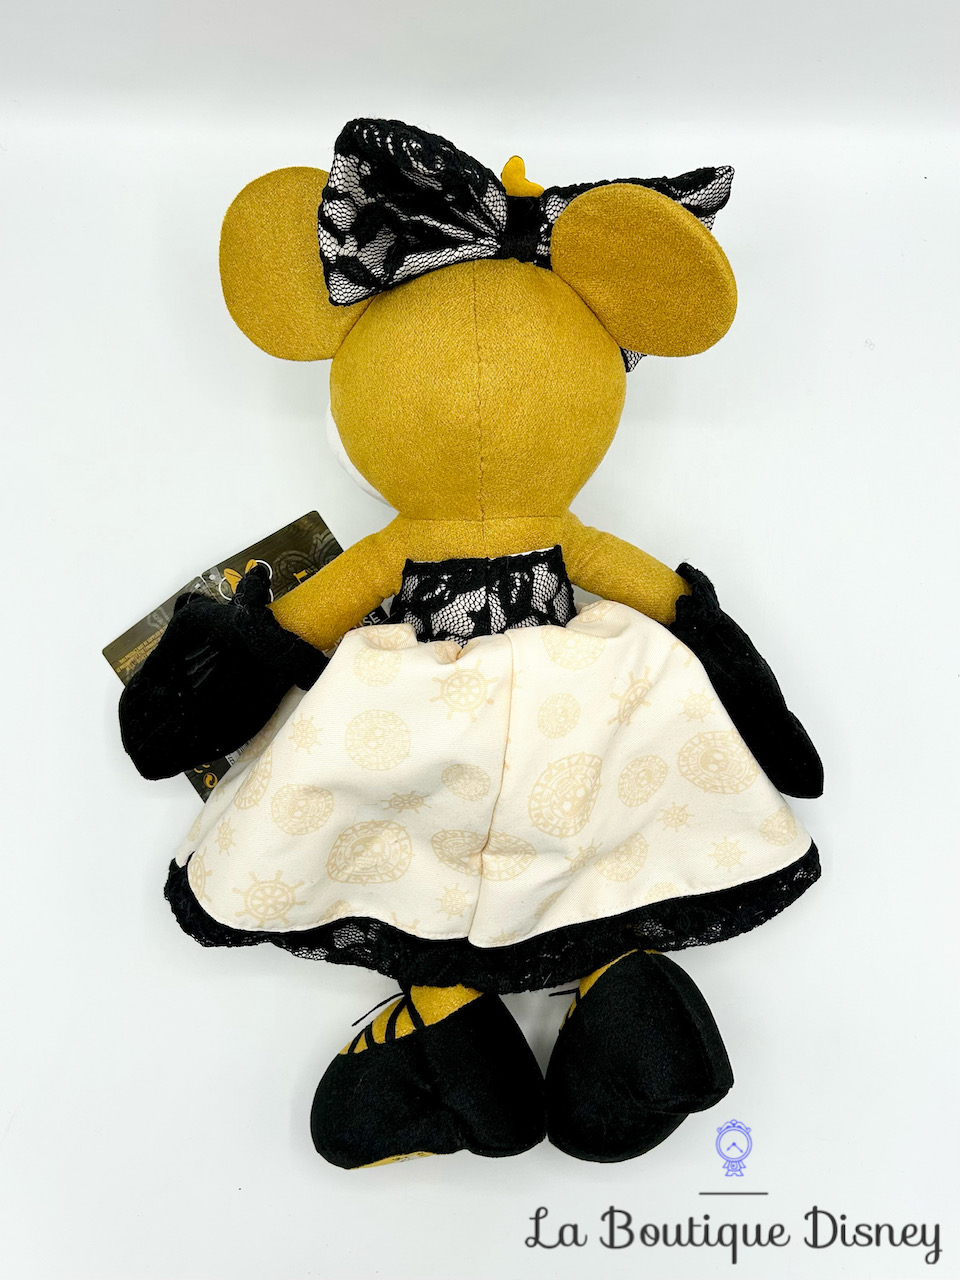 peluche-minnie-mouse-main-attraction-2-12-pirates-of-the-caribbean-disney-store-édition-limitée-6